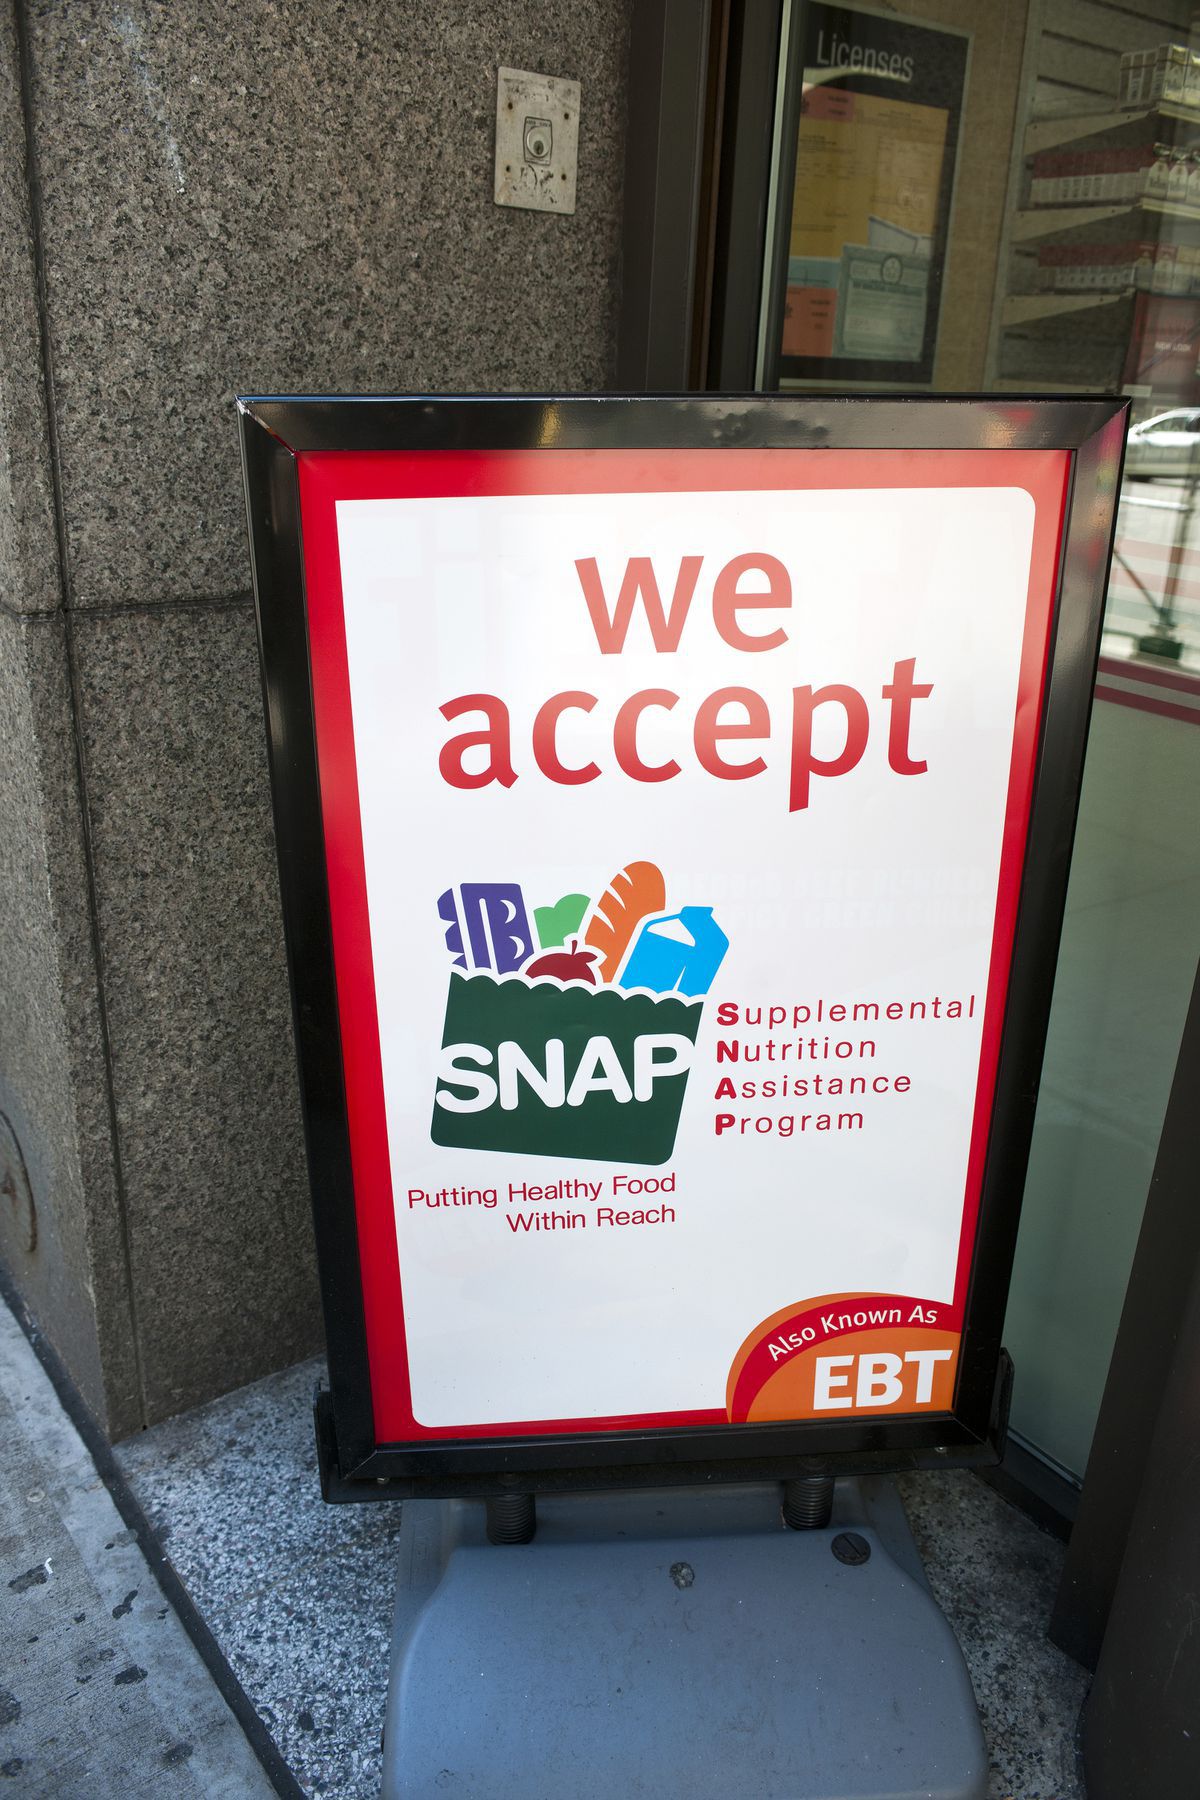 Food stamps help more than the hungry